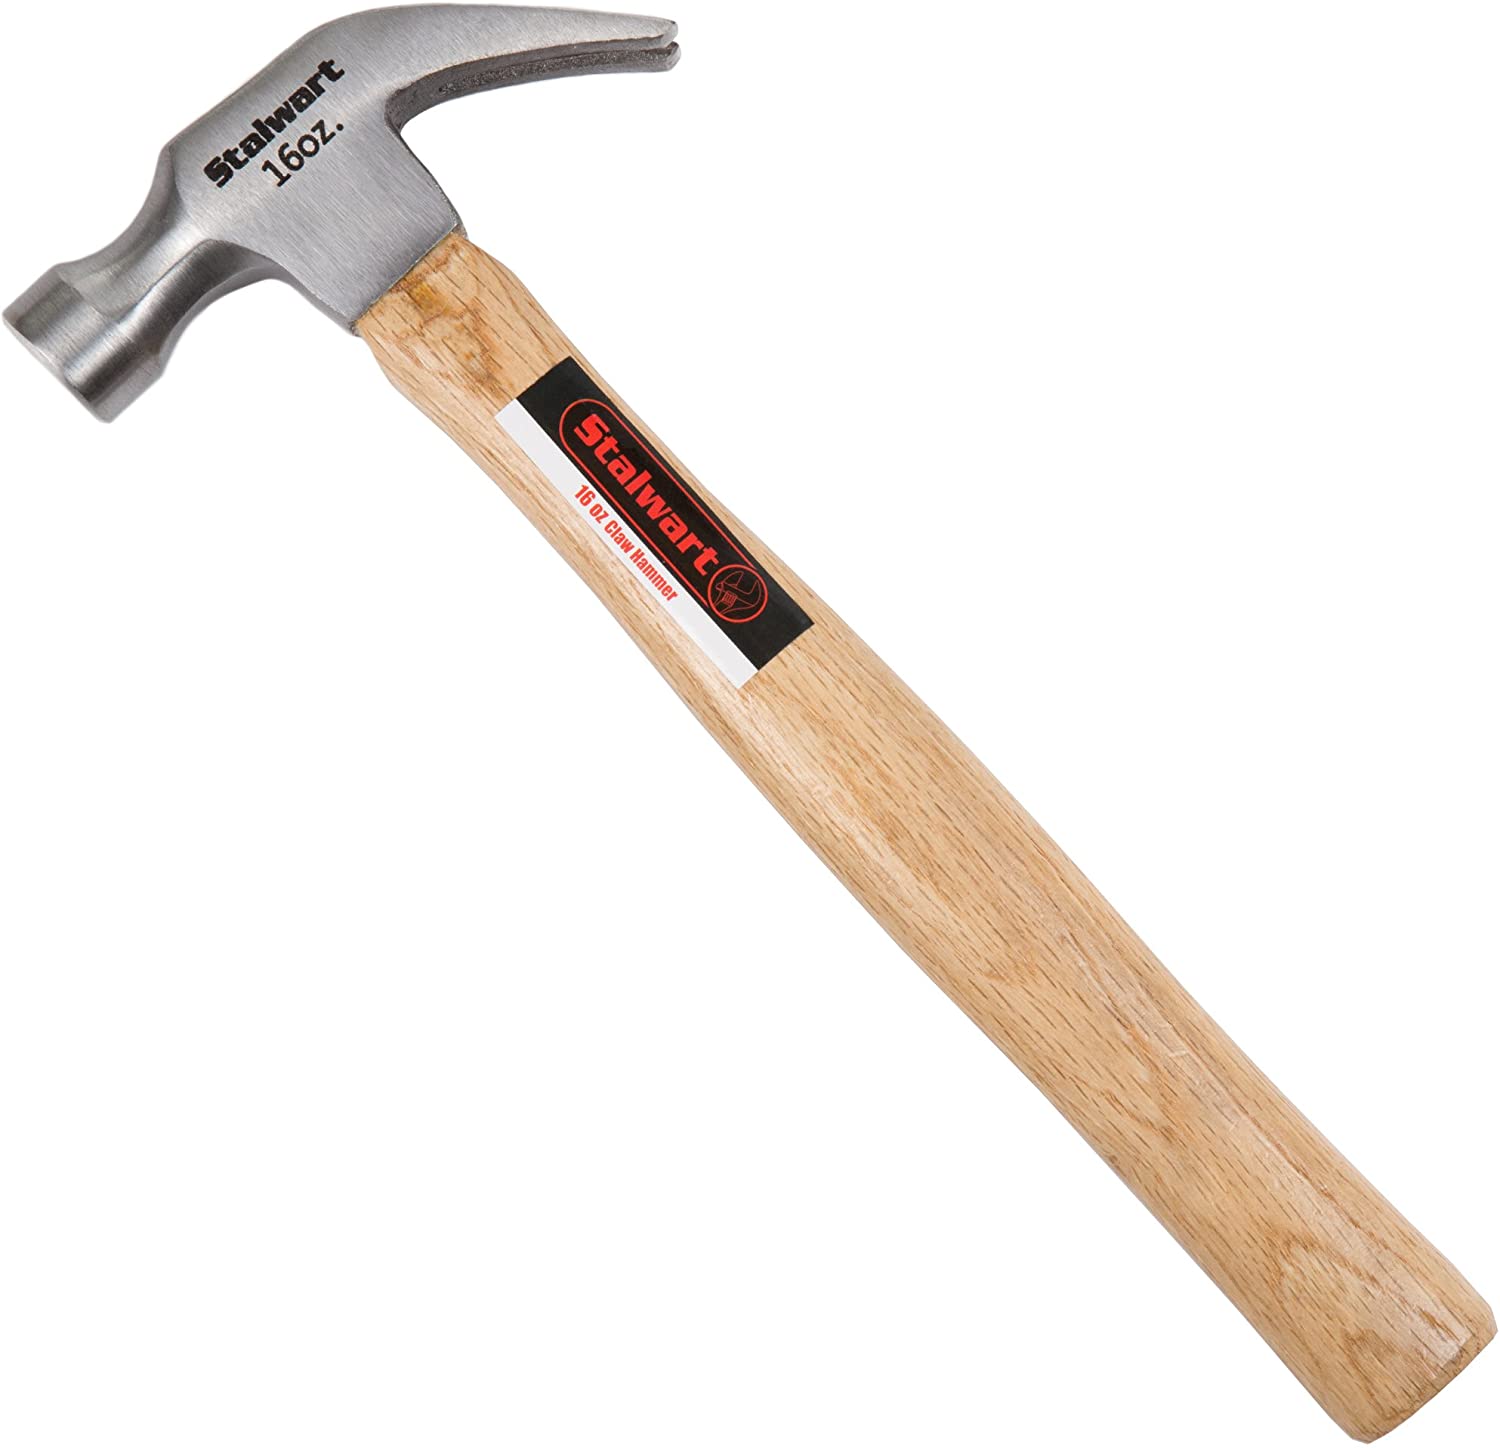 Stalwart 75-HT3000 Natural Hardwood Claw Hammer, 16-Ounce